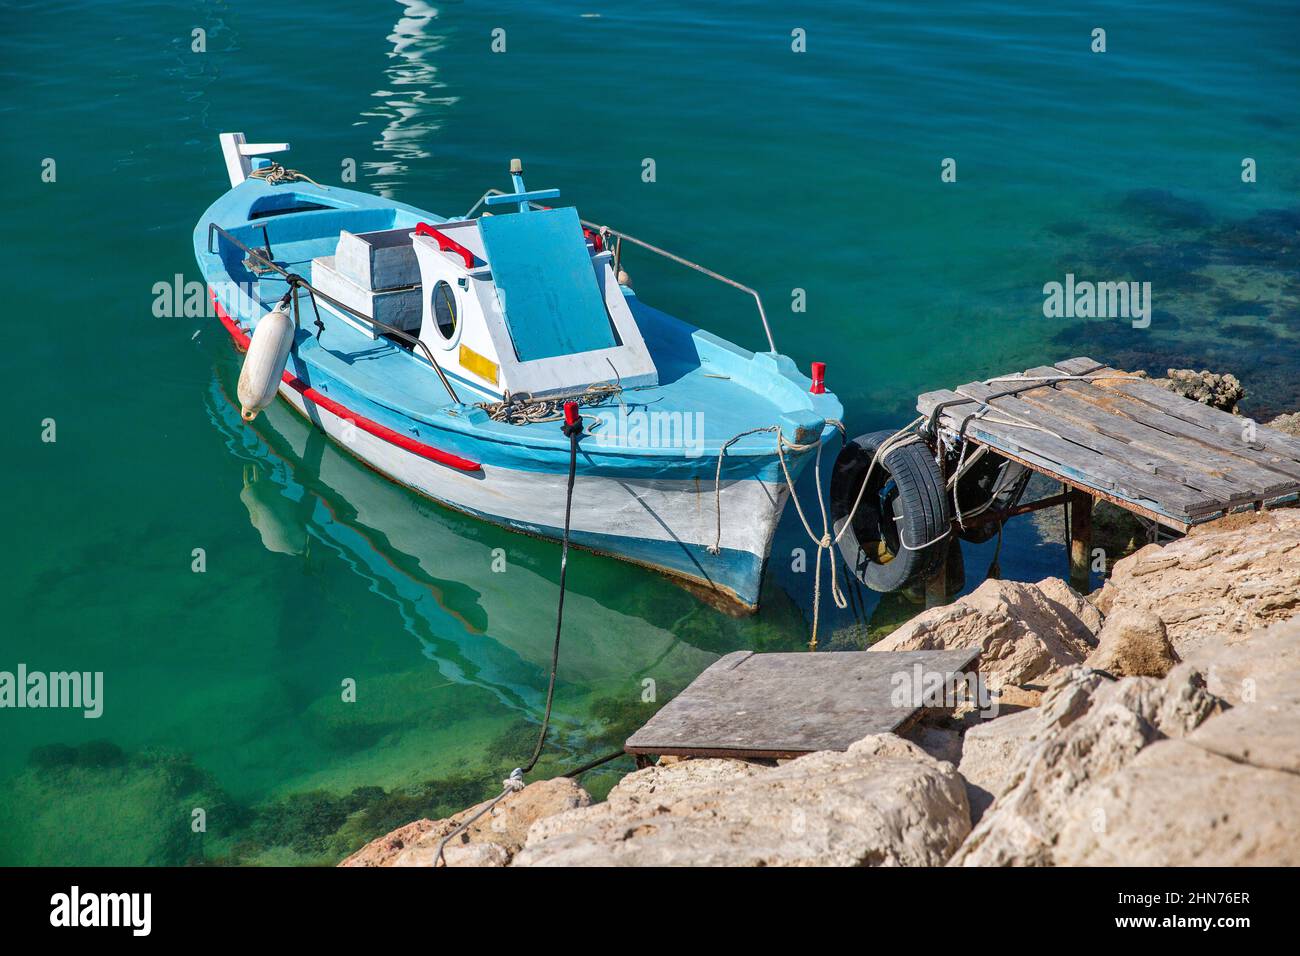 Fishing boat closeup in seaport. Ayia Napa is a tourist resort at the far eastern end of the southern coast of Cyprus. Stock Photo